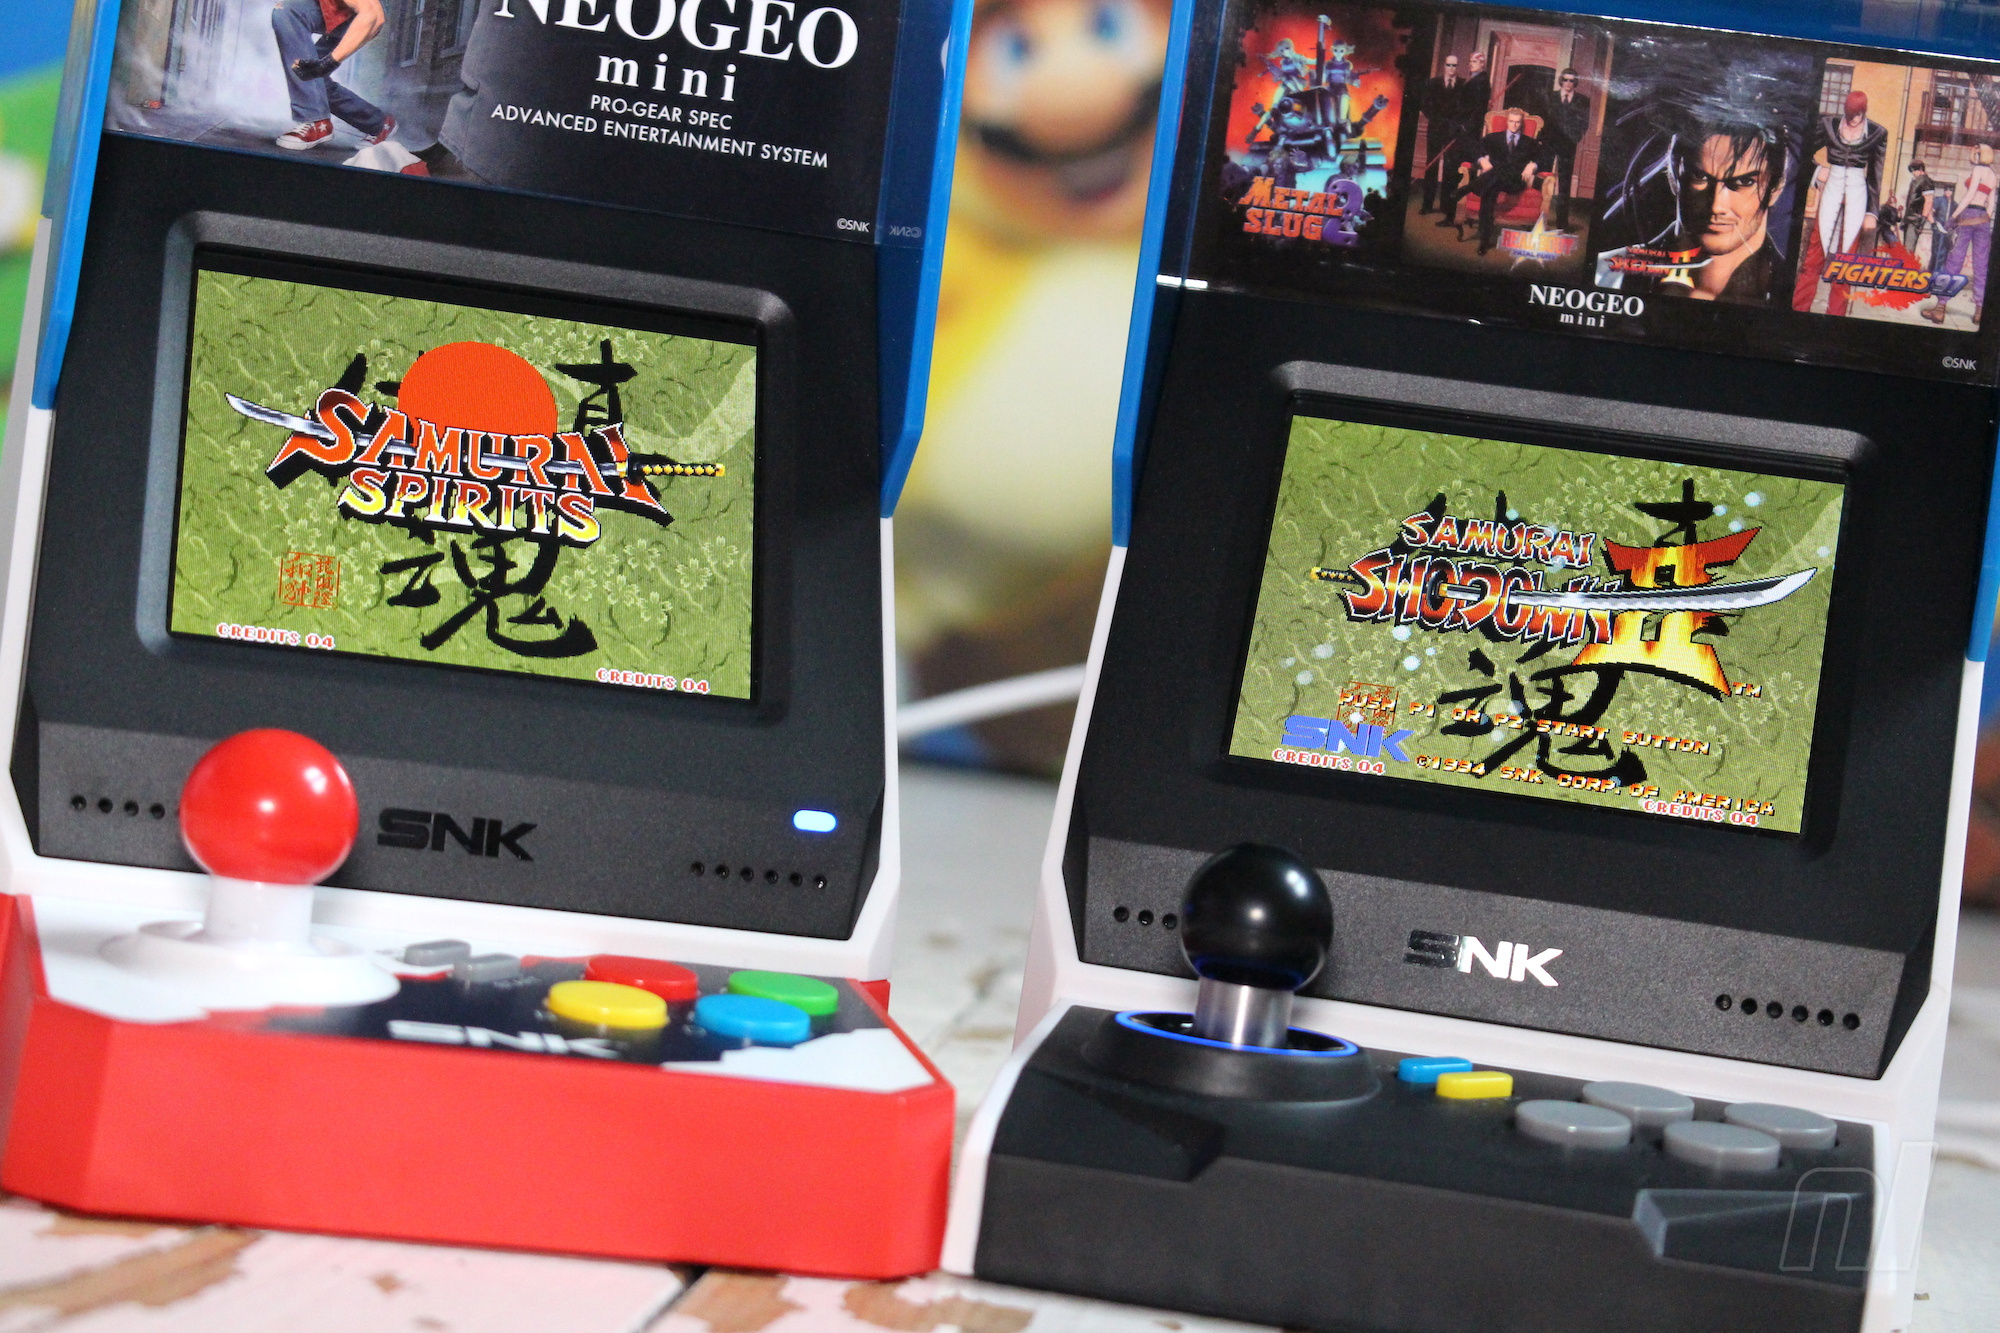 Hardware Review SNK Neo Geo Mini International Edition Different